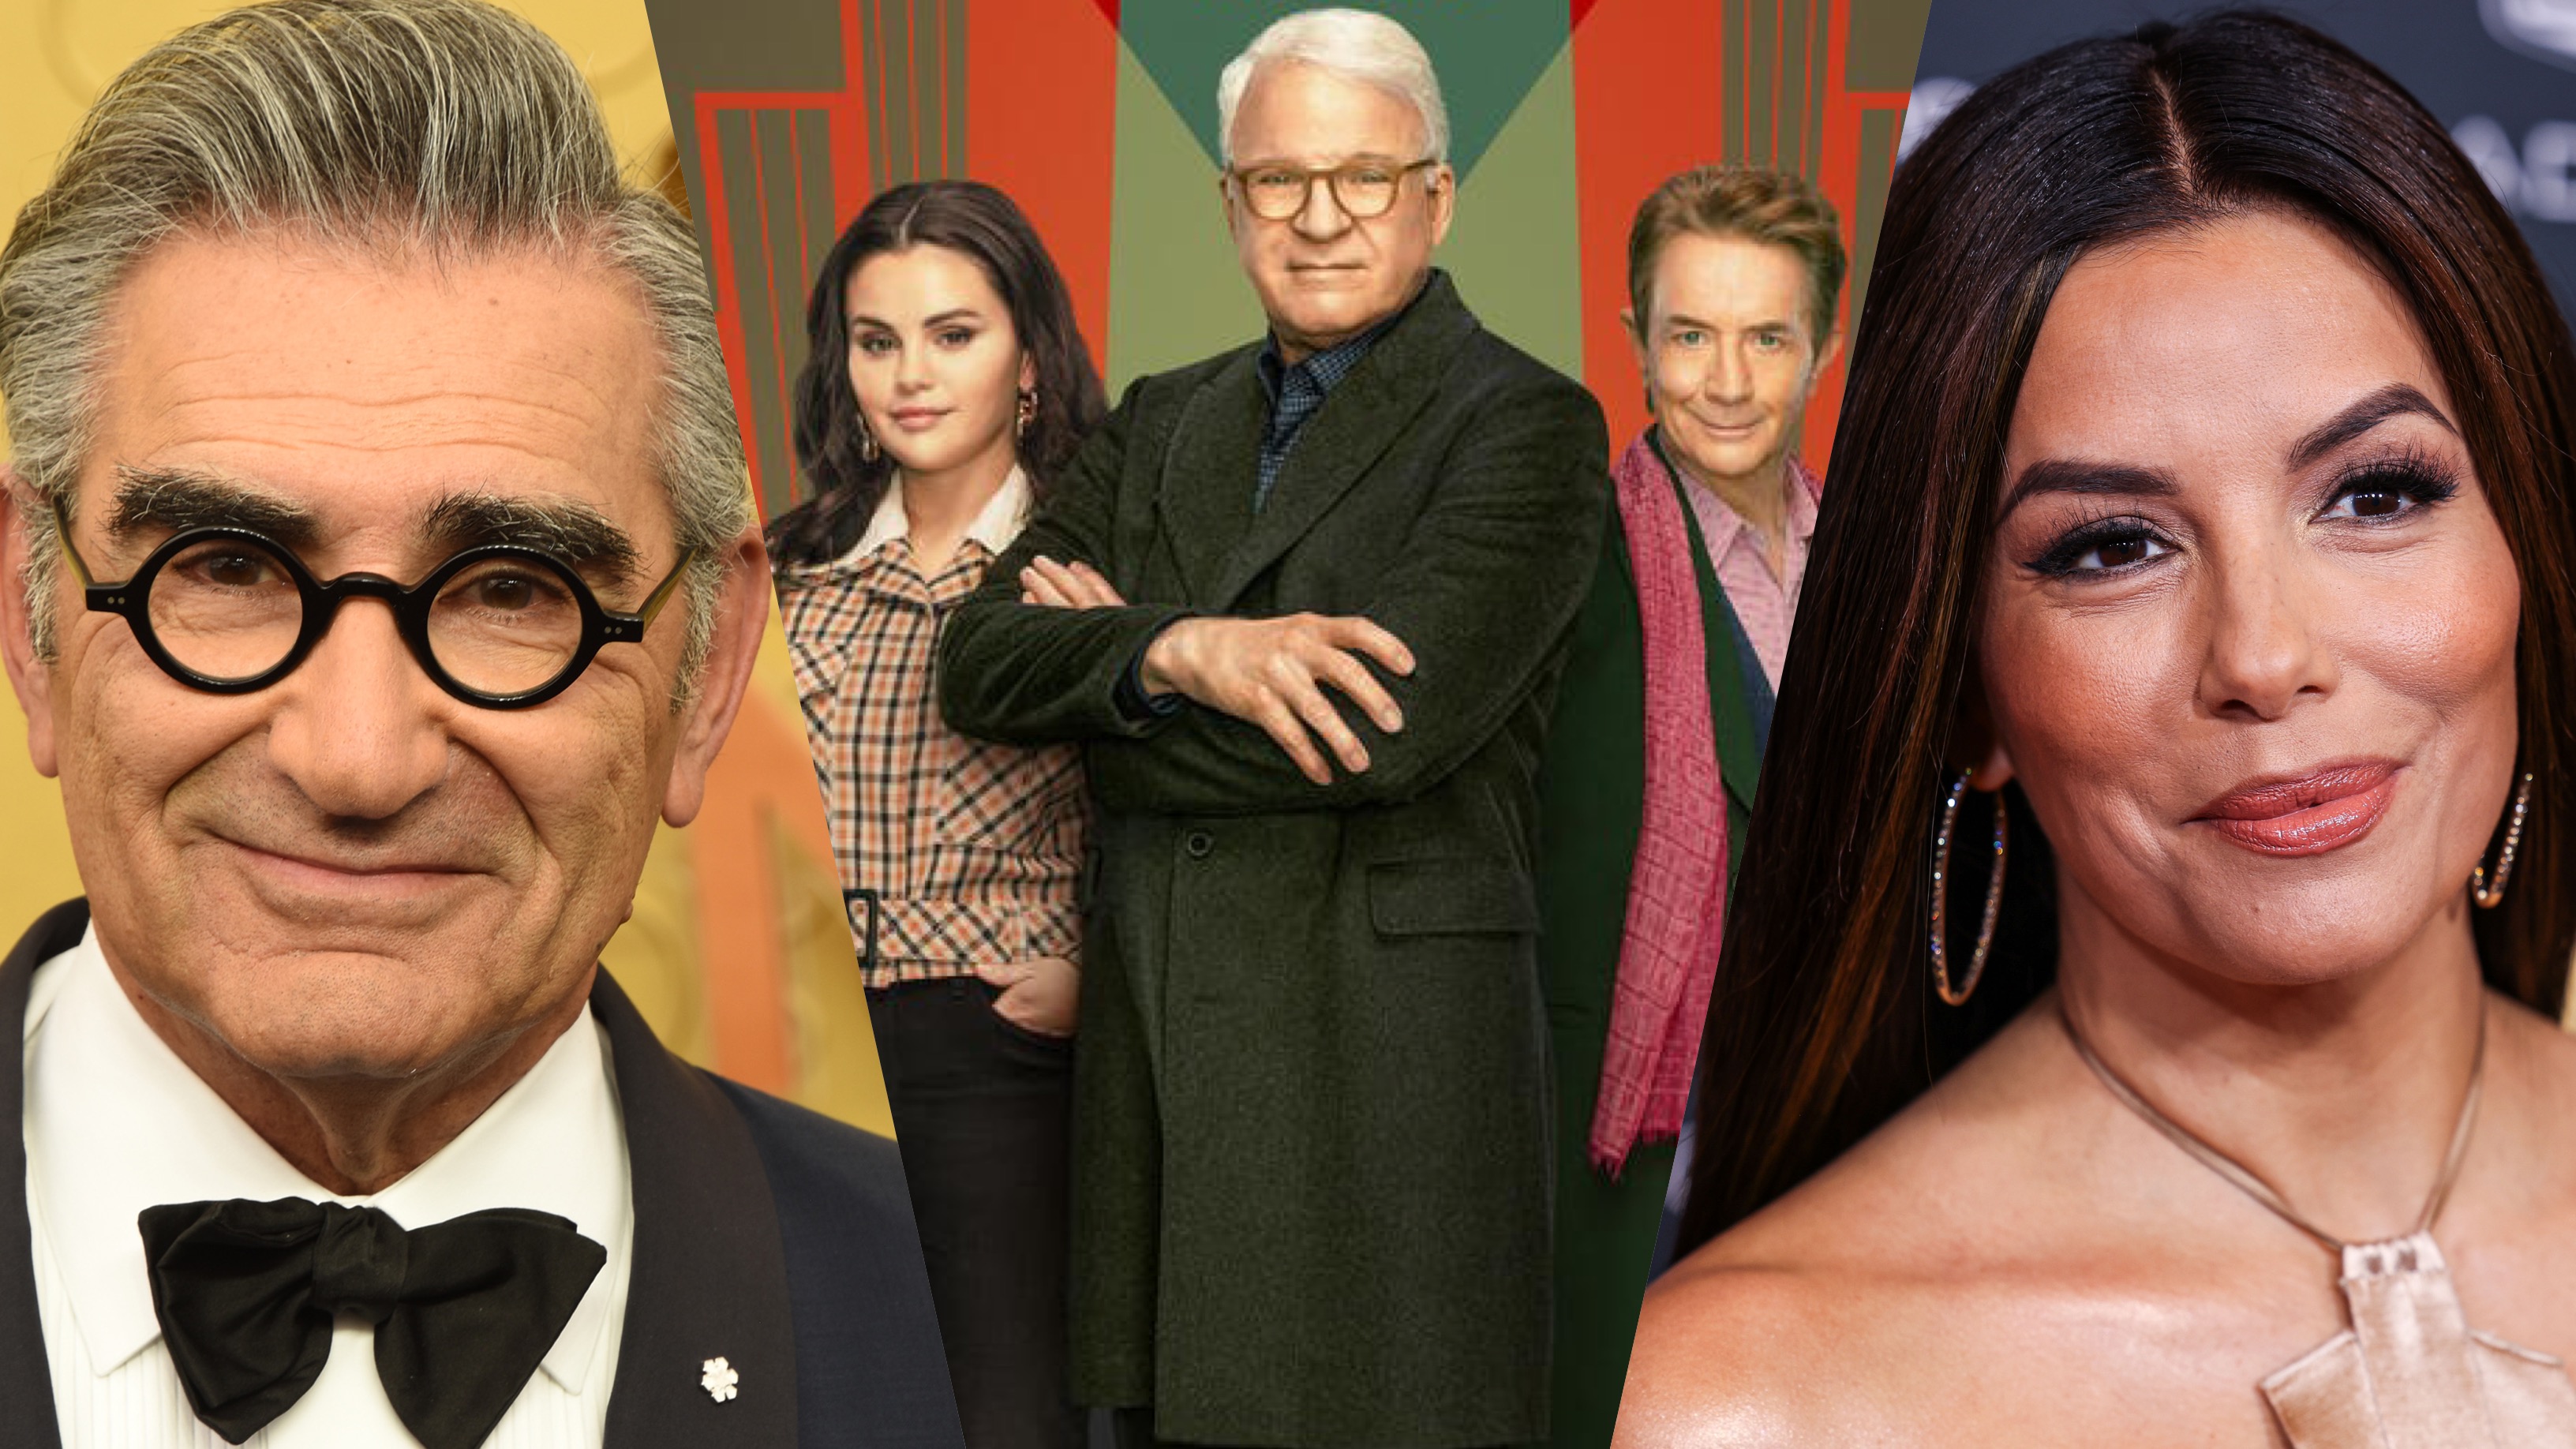 Eugene Levy and Eva Longoria Join ‘Only Murders in the Building’ Season 4